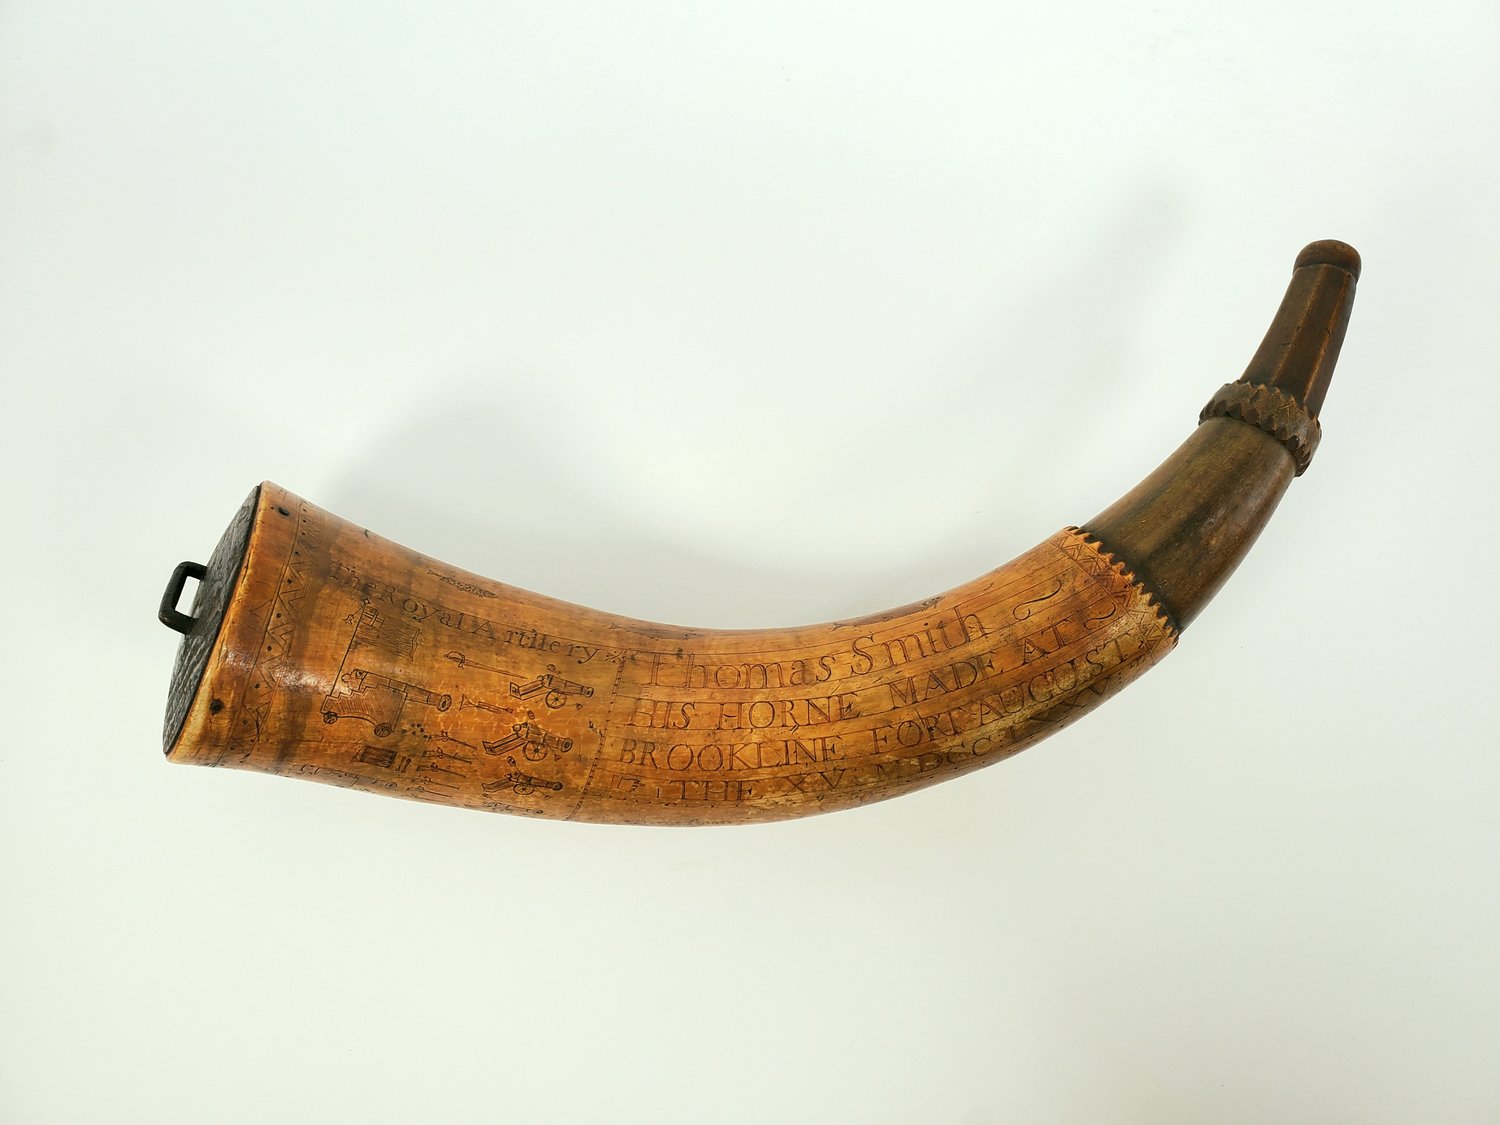 COLLECTIBLES: Thomas Smith's Powder Horn: History and Art